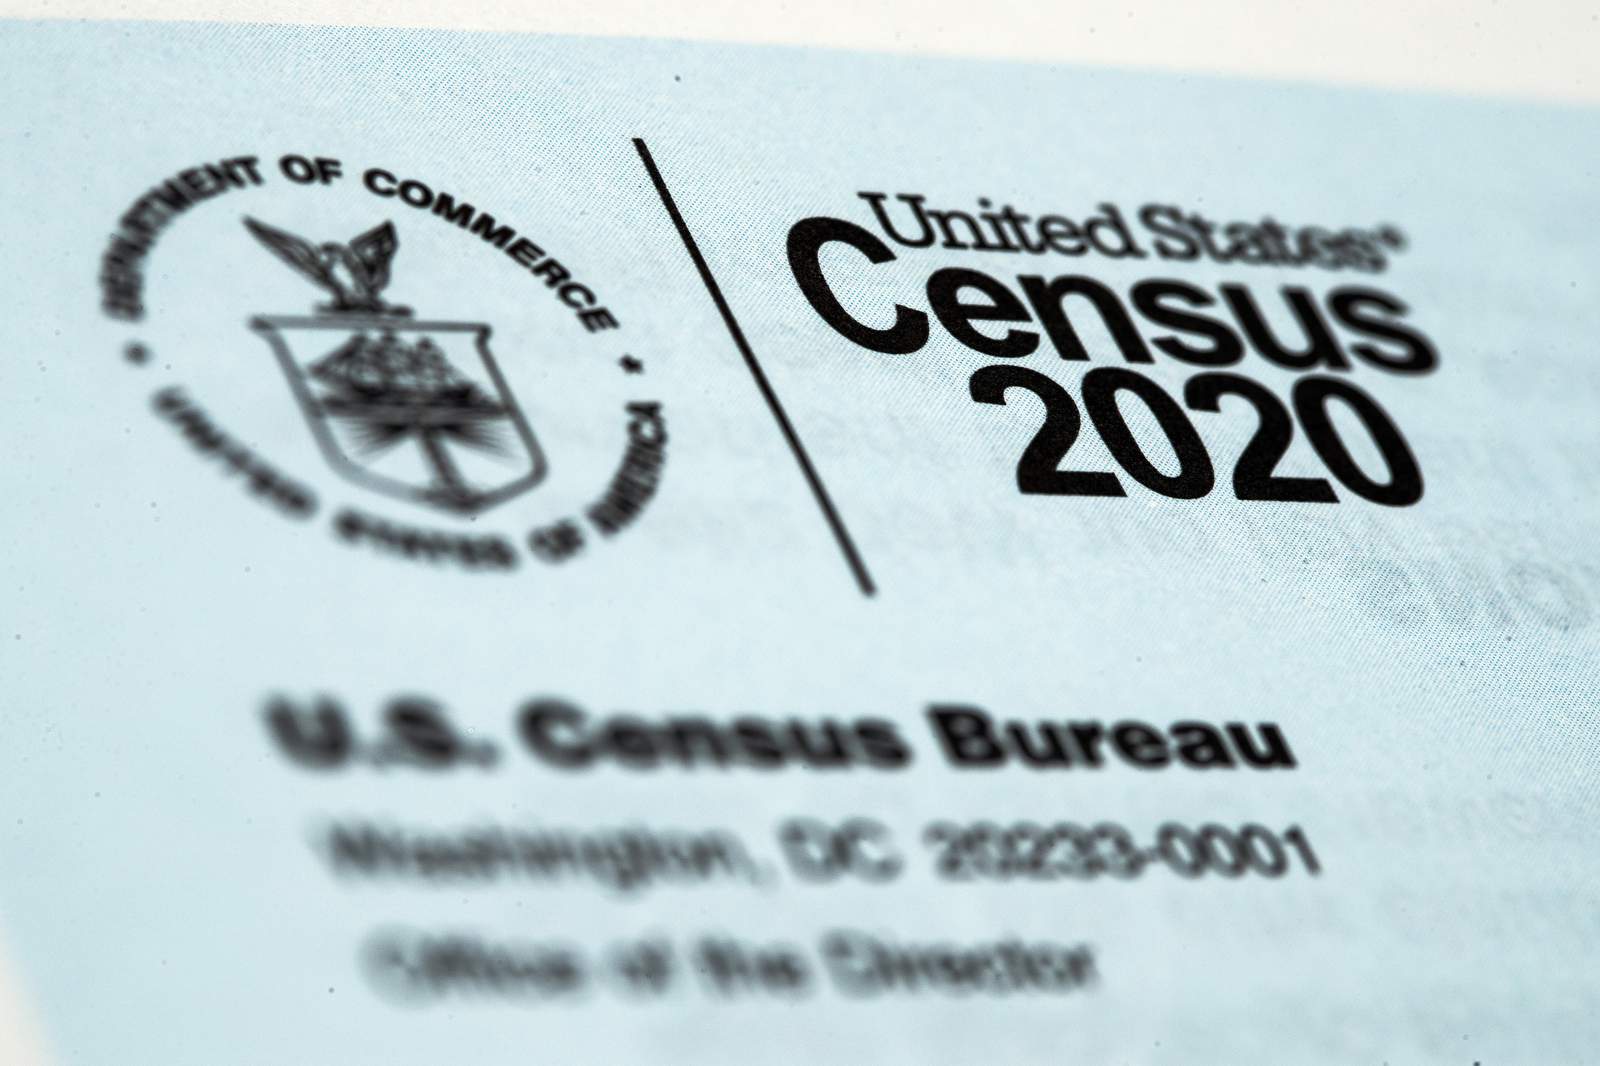 Cities, groups aim to stop Ohio's push for early census data